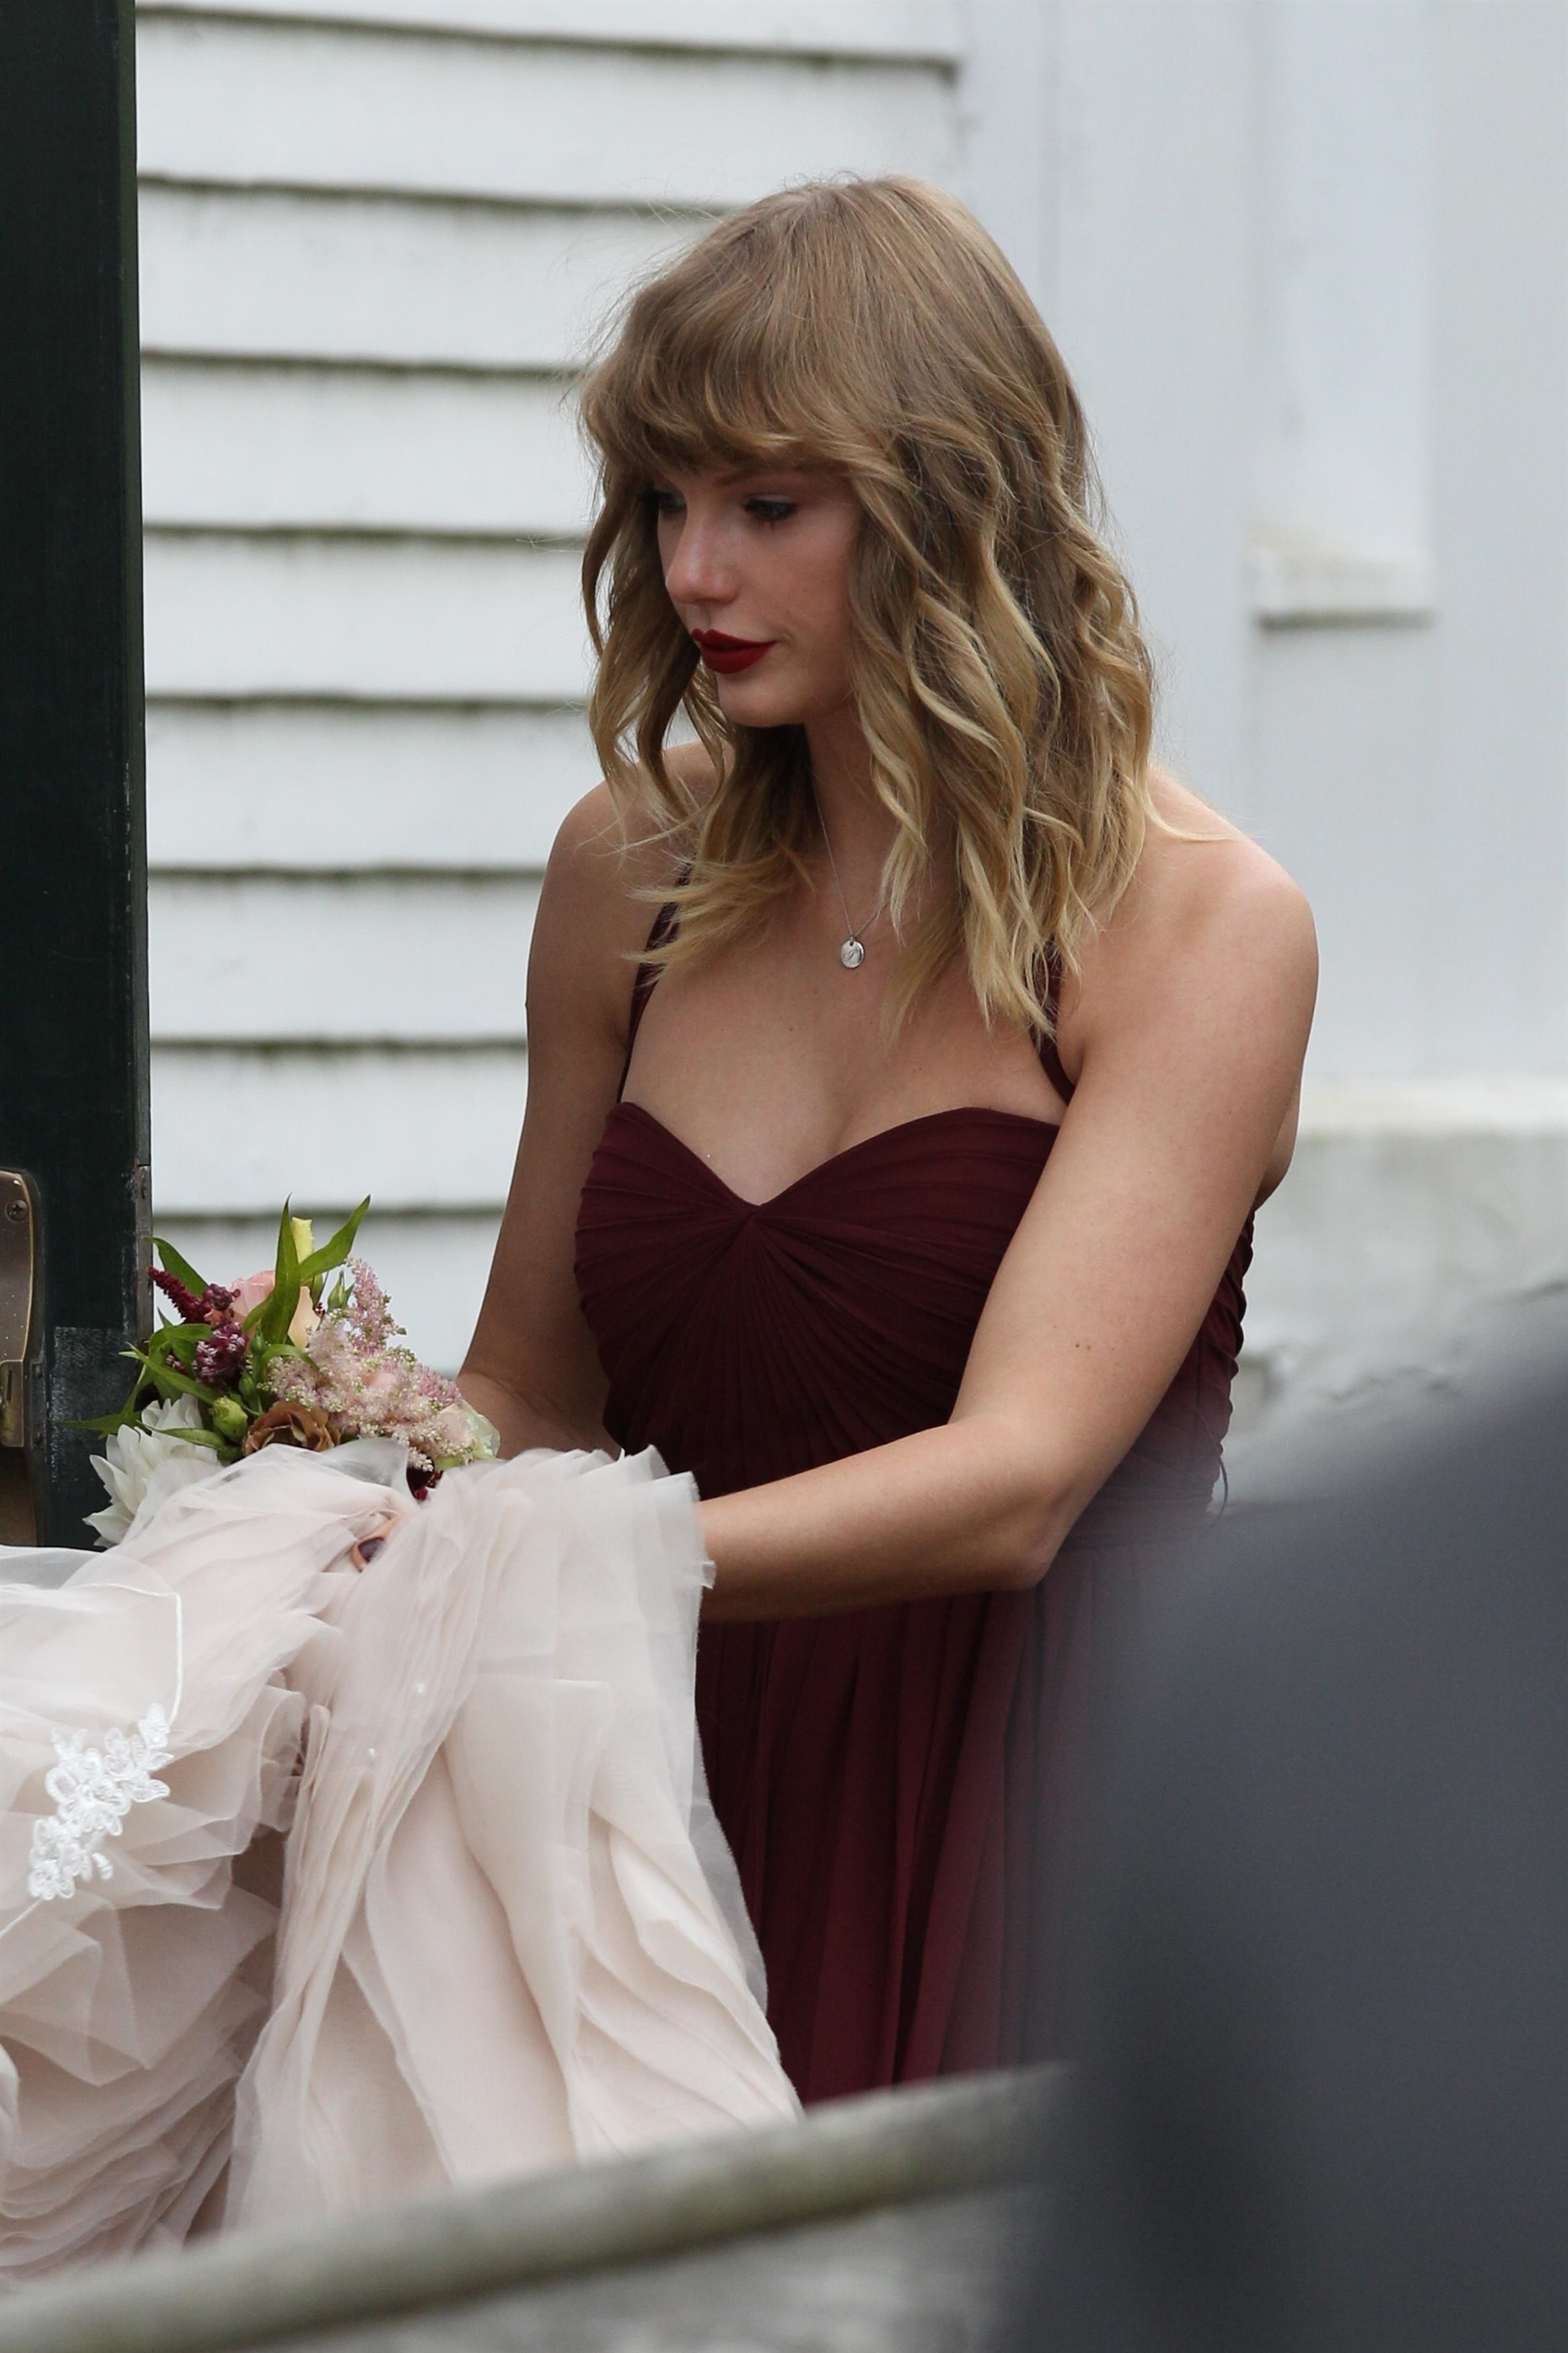 Taylor holding a bouquet and a wedding dress